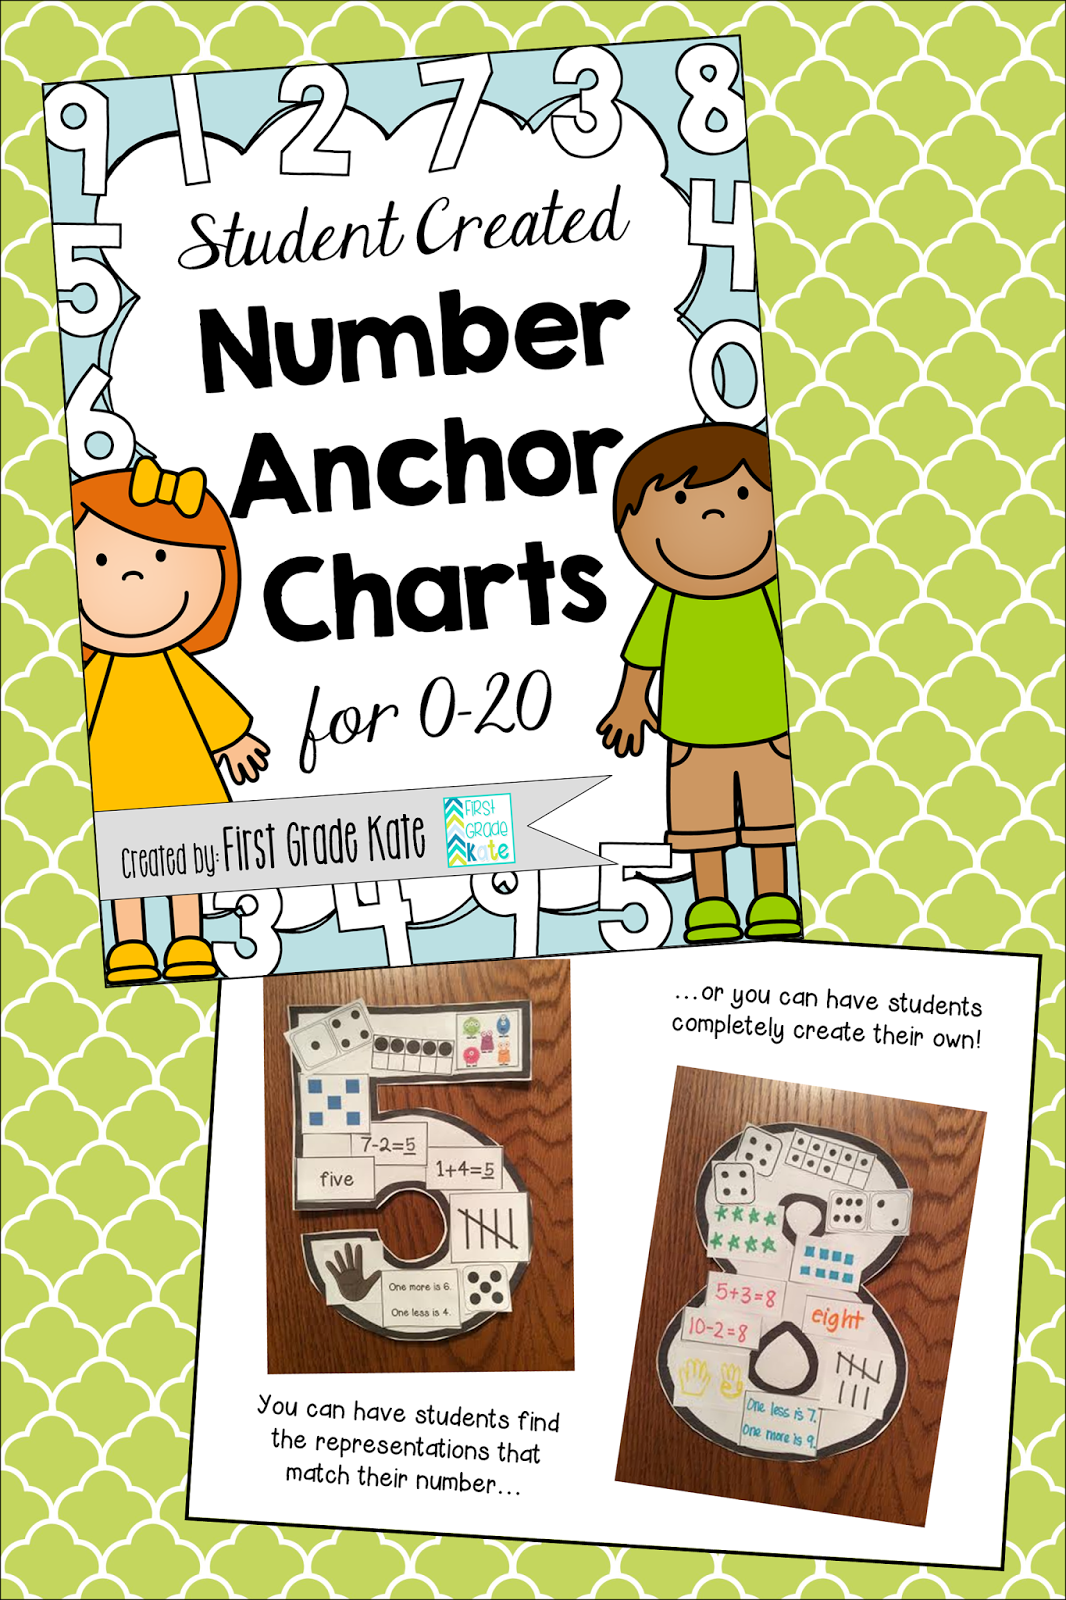 http://www.teacherspayteachers.com/Product/Student-Created-Number-Anchor-Charts-0-20-1261642